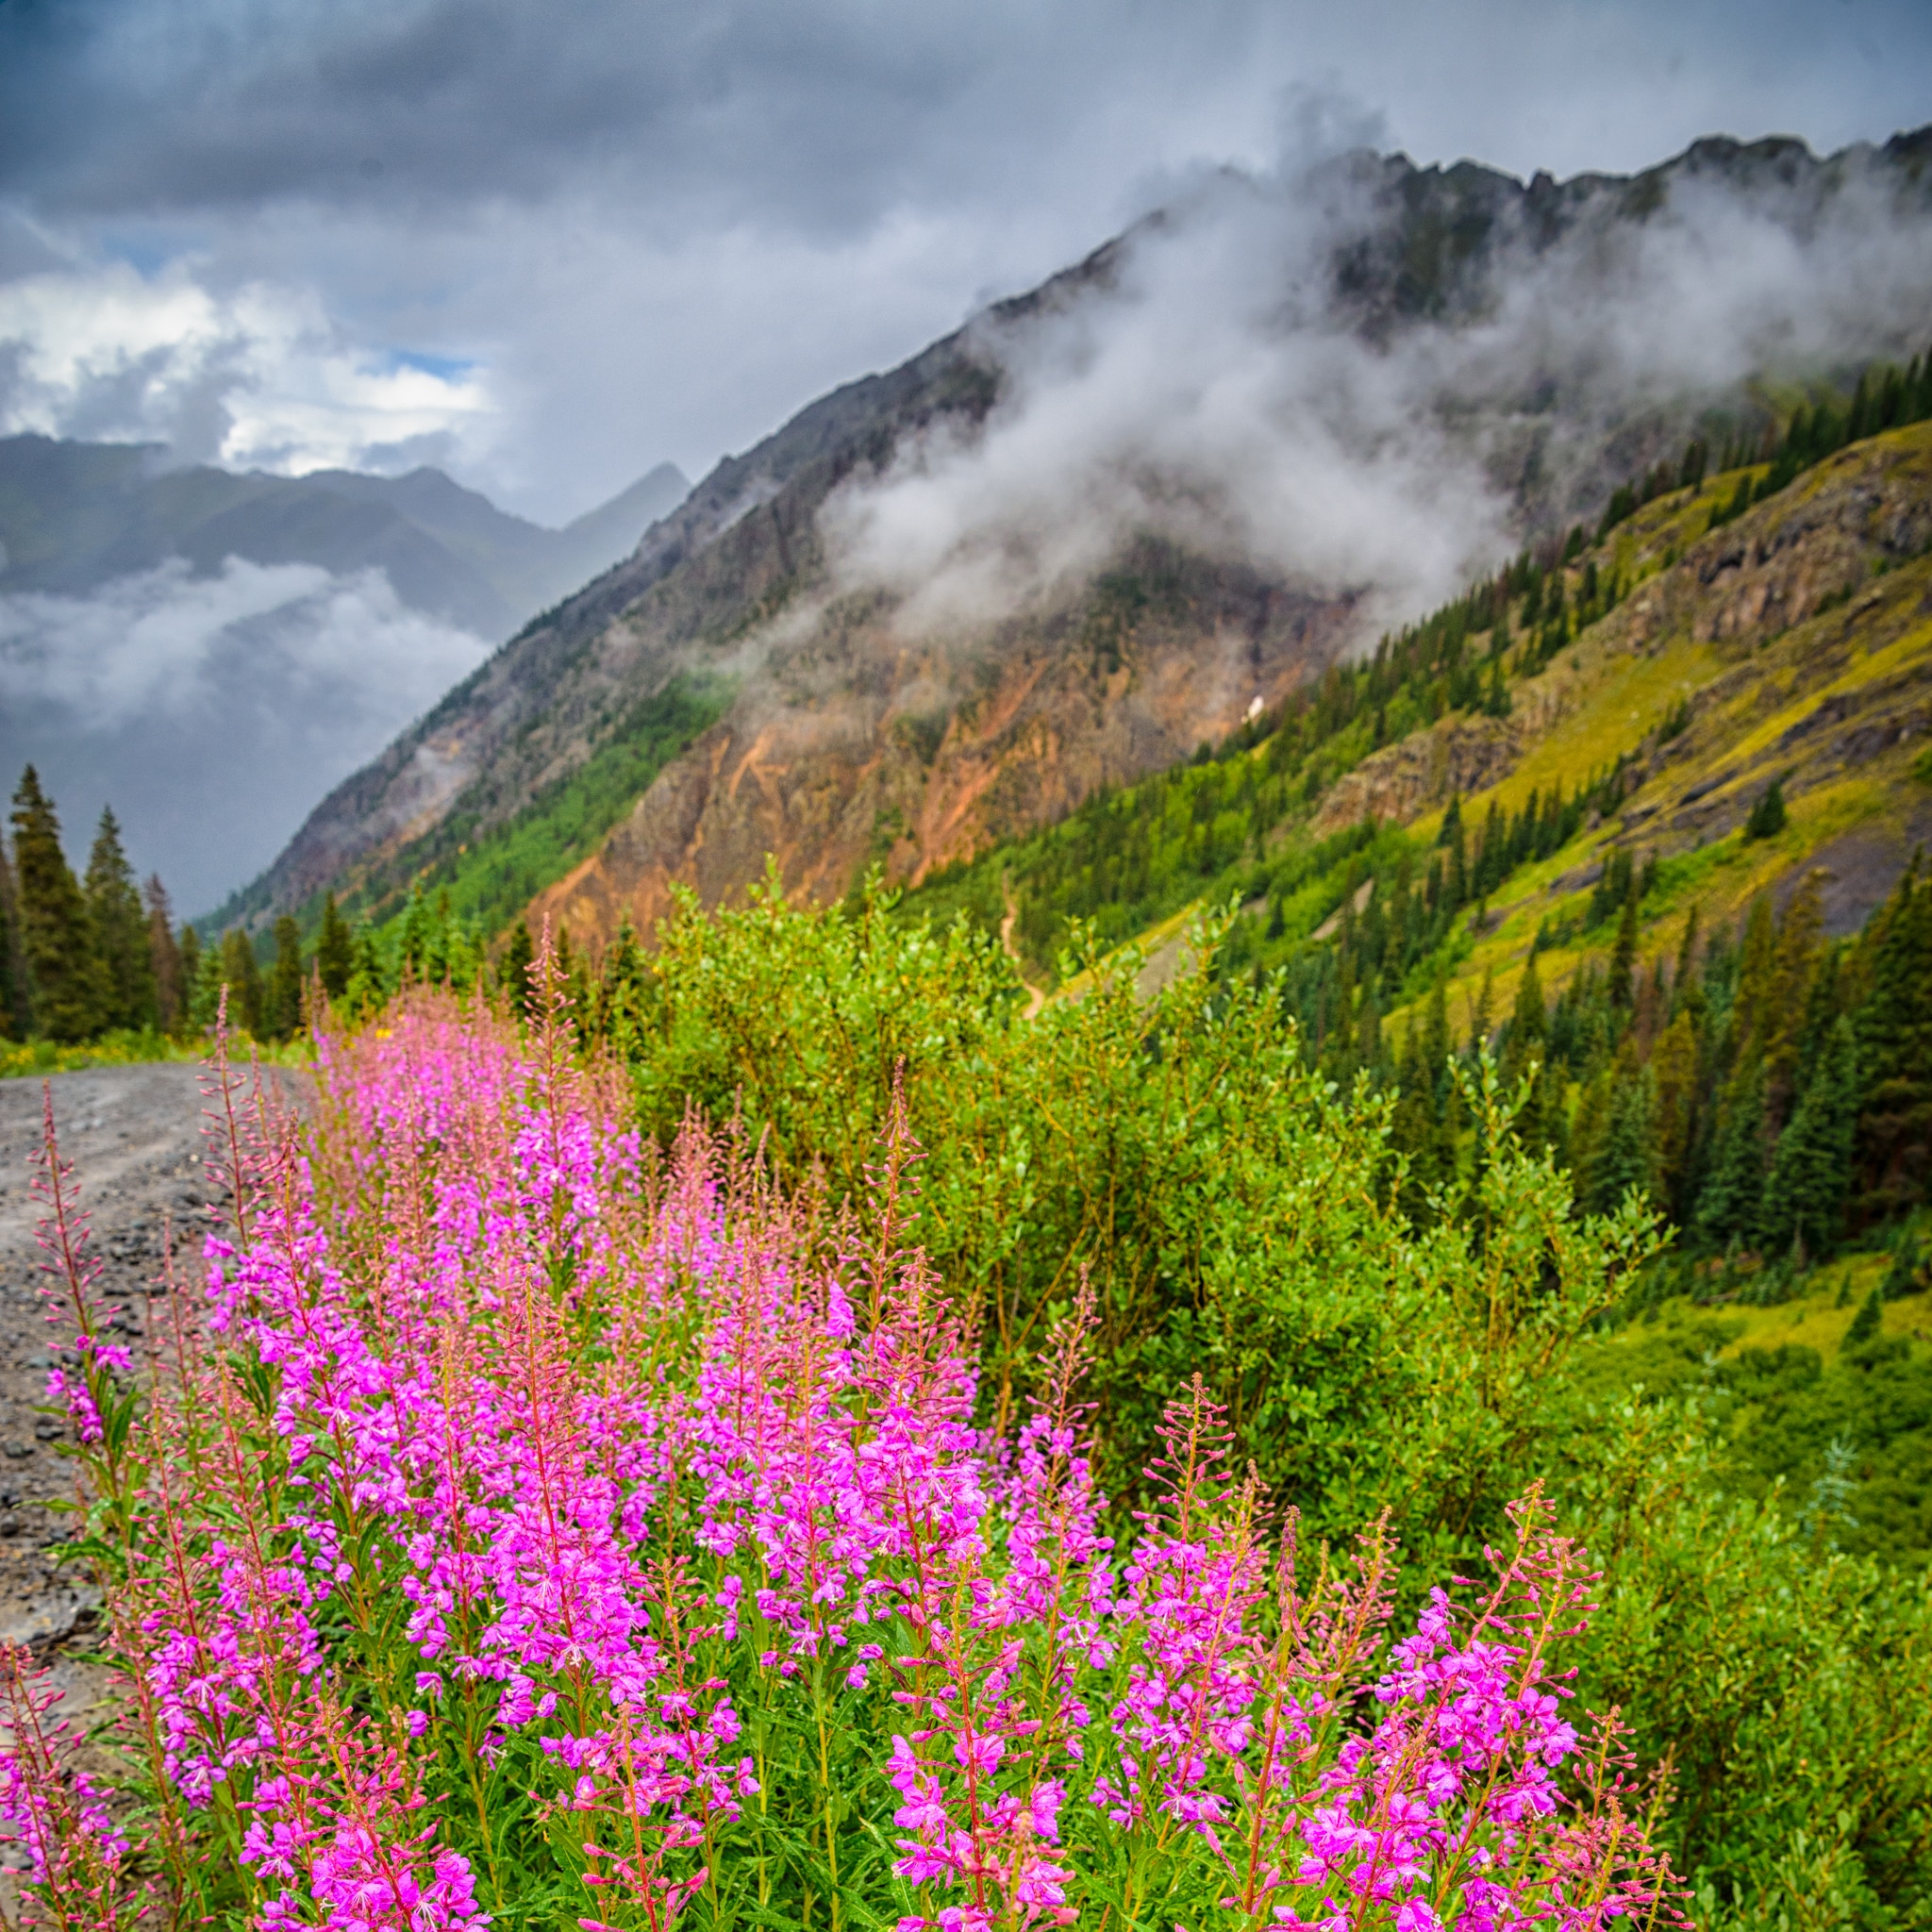 The fireweed along Stony Pass Road near Silverton, Colorado, is especially brilliant in color on this cold and rainy day.